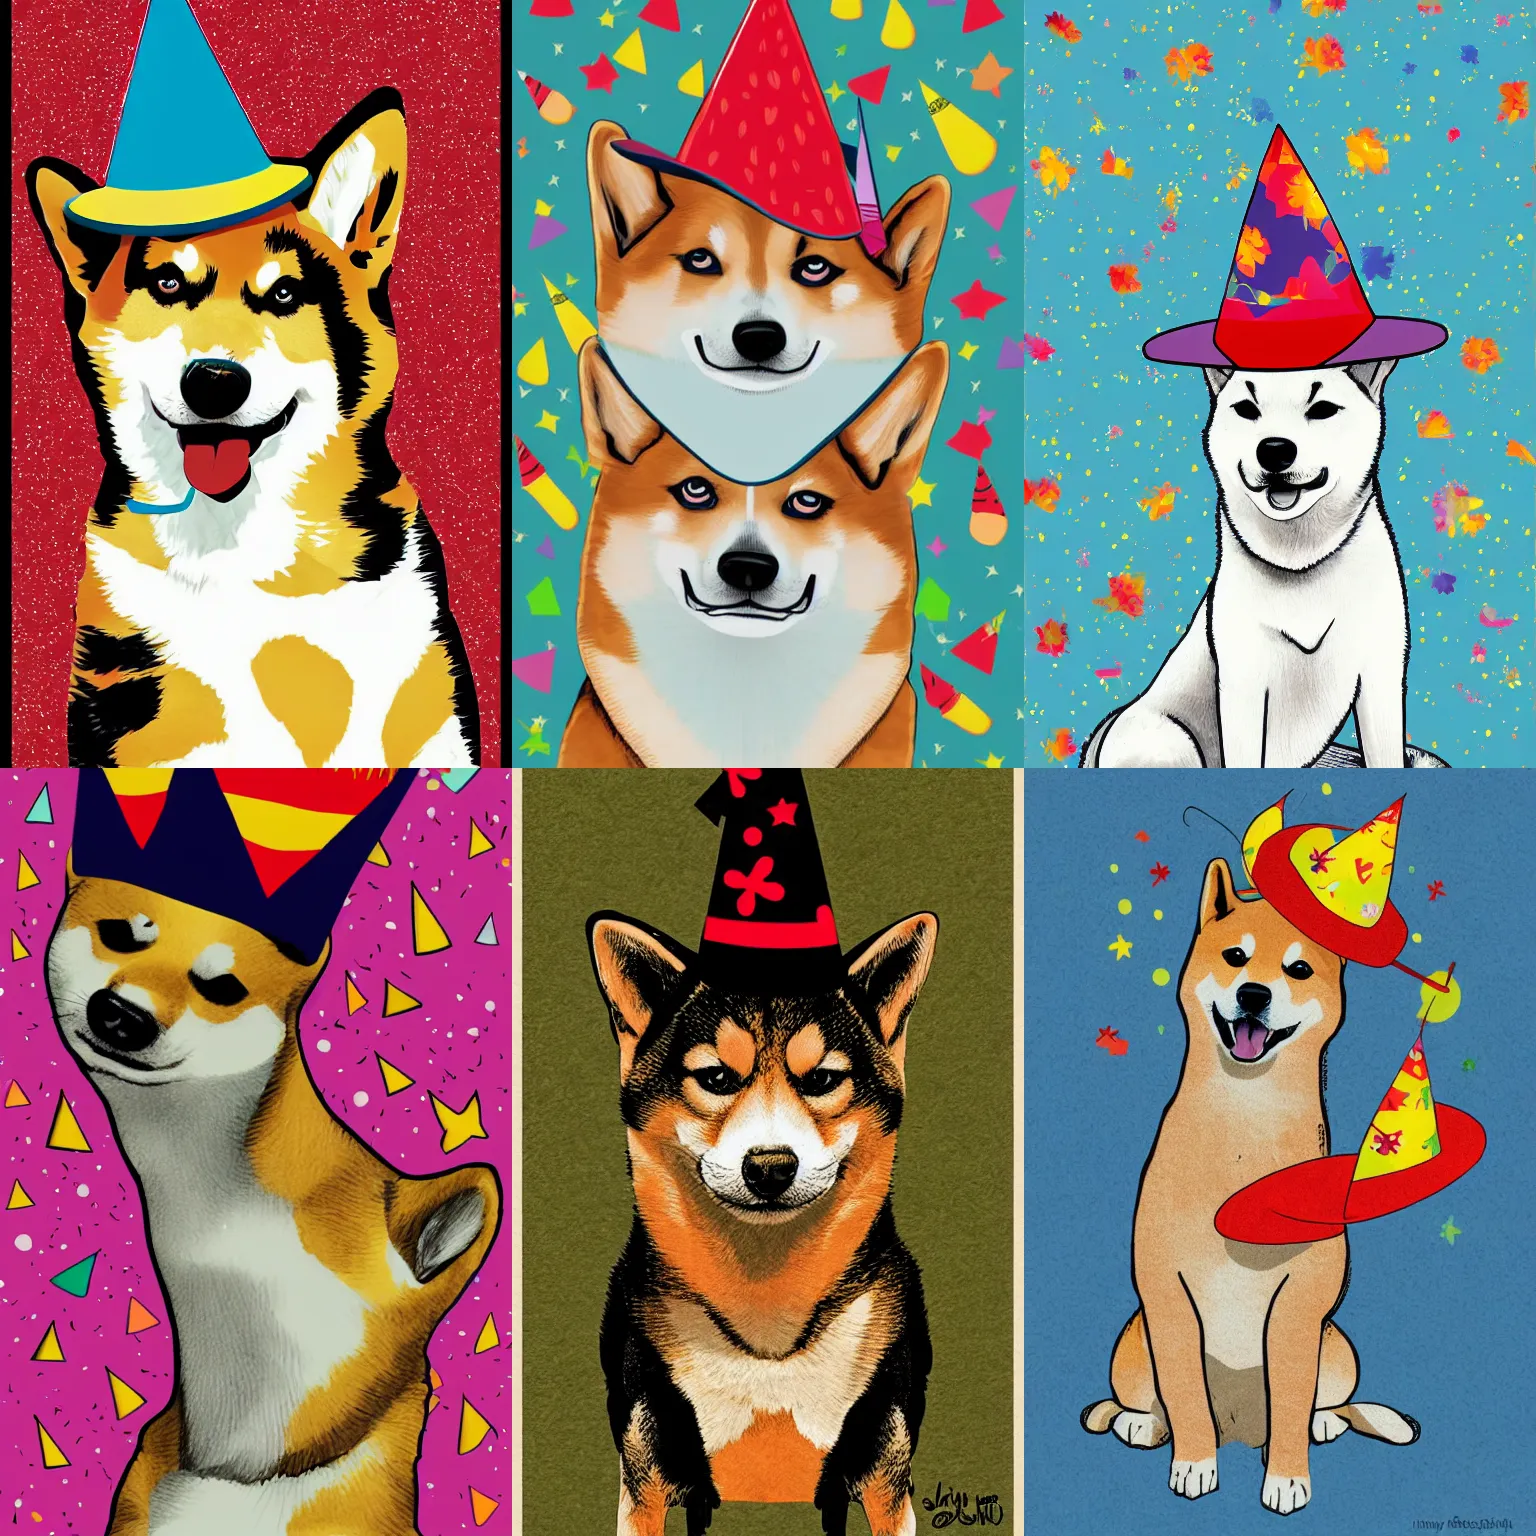 Prompt: Shiba Inu illustration wearing a party hat, in the style of a jimmy hendrix poster